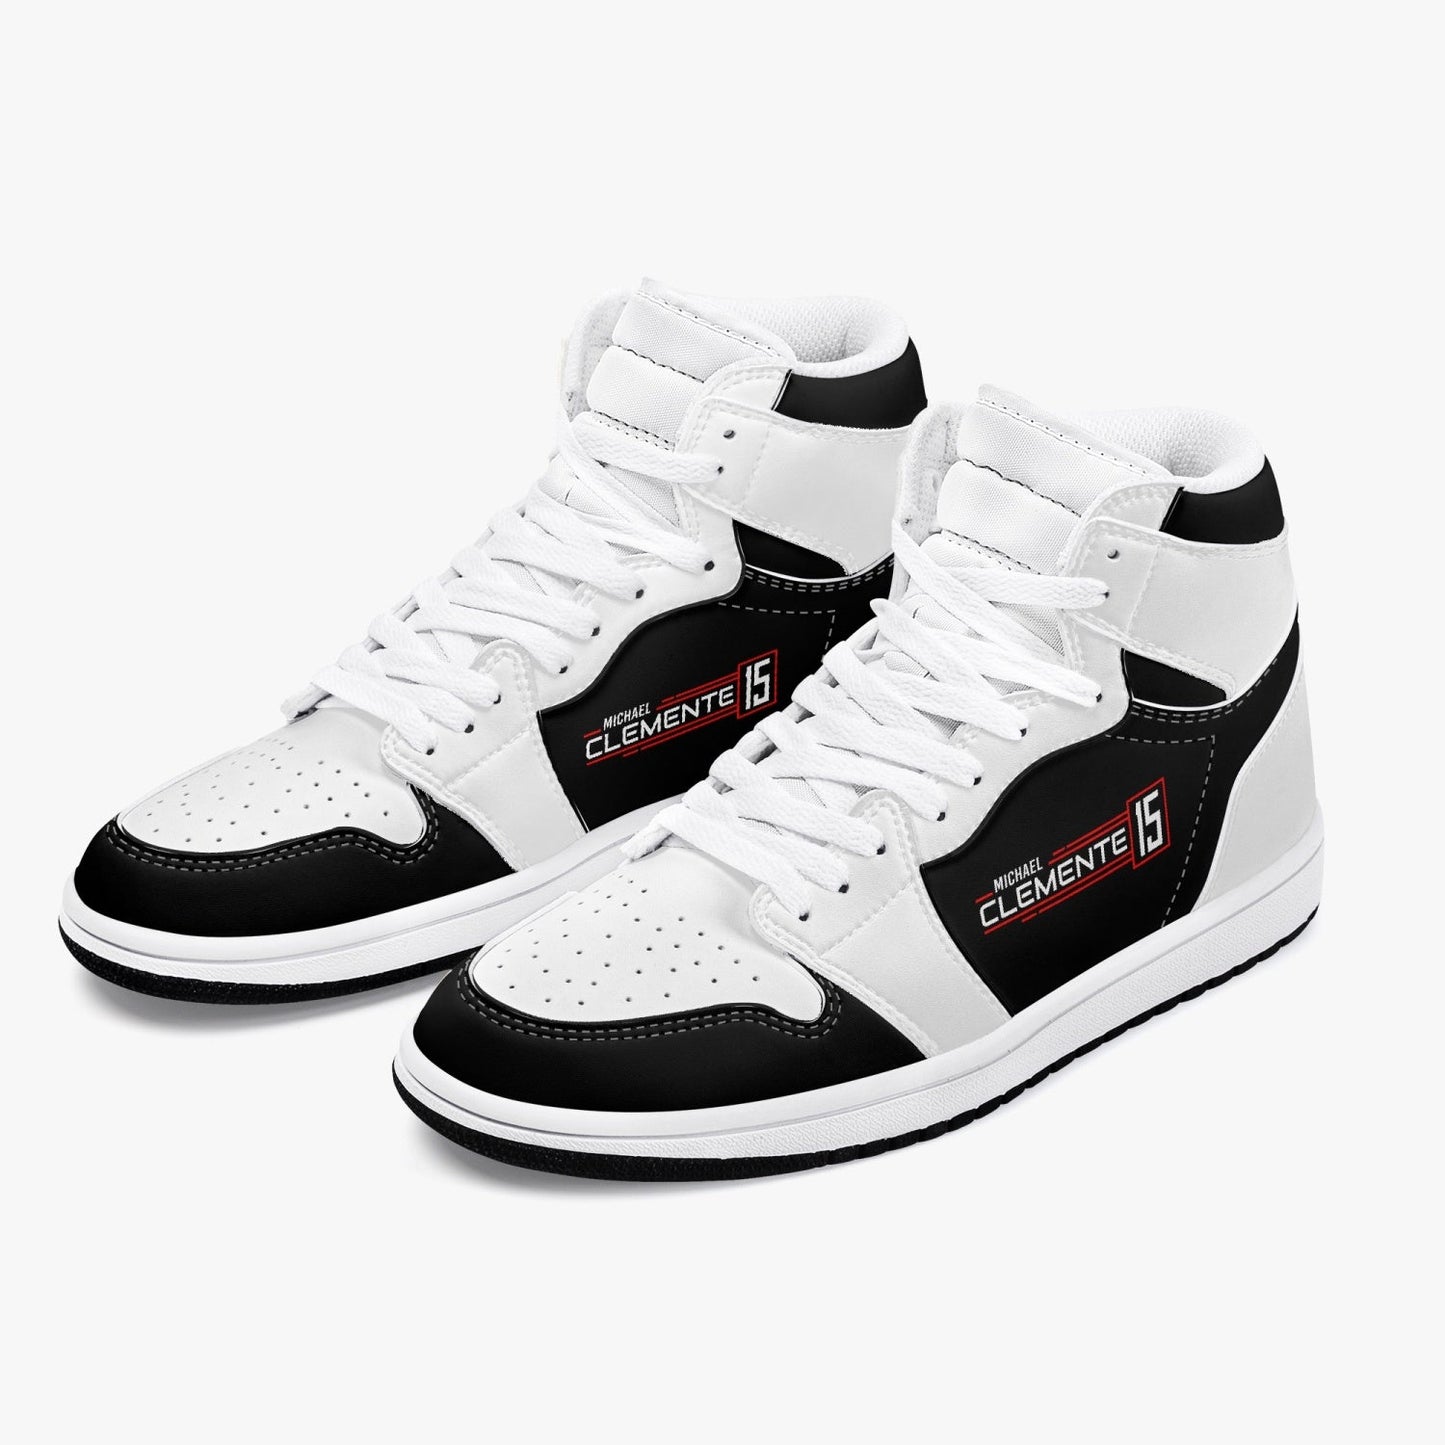 MICHAEL CLEMENTE 15 Ultimate High-Top Leather Sneakers - circuit lace